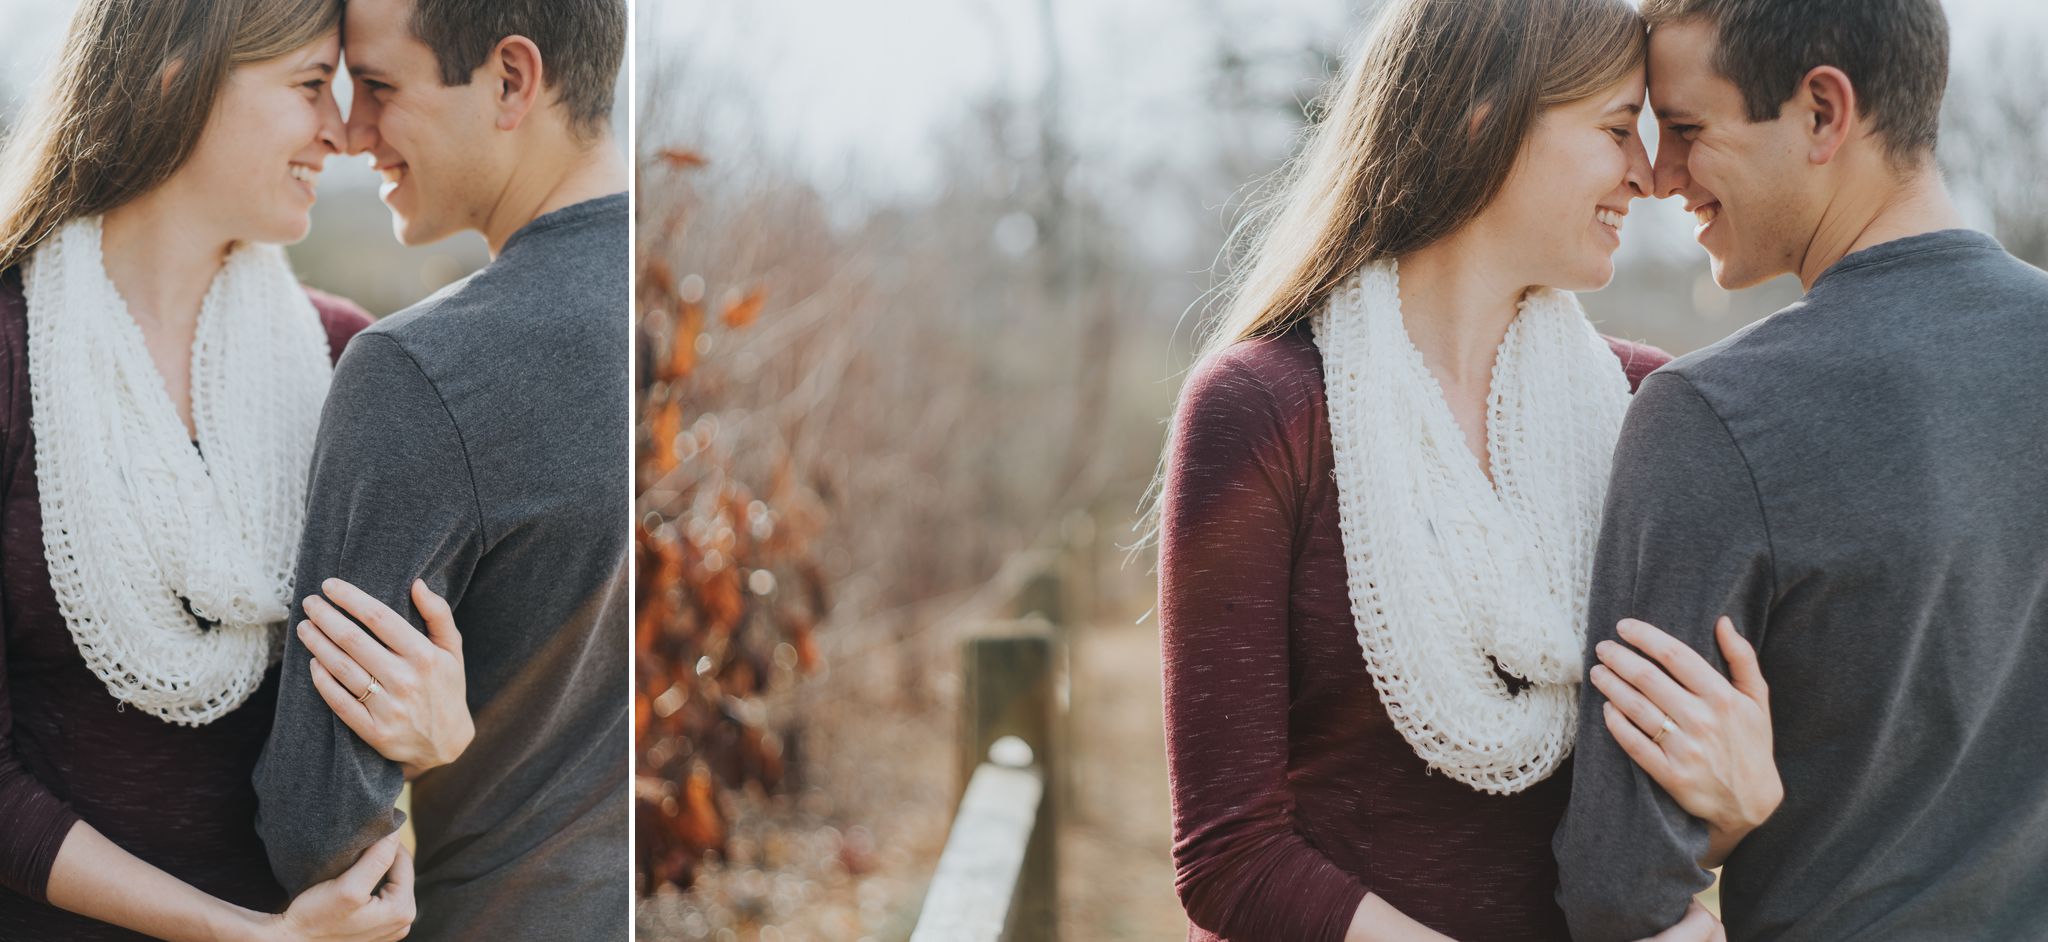 A couple snuggles together during their engagement session at Blackburn Park. The woman is wearing a white infinity scarf. You can see her engagement ring clearly, as her arm is wrapped around her partner's bicep. 